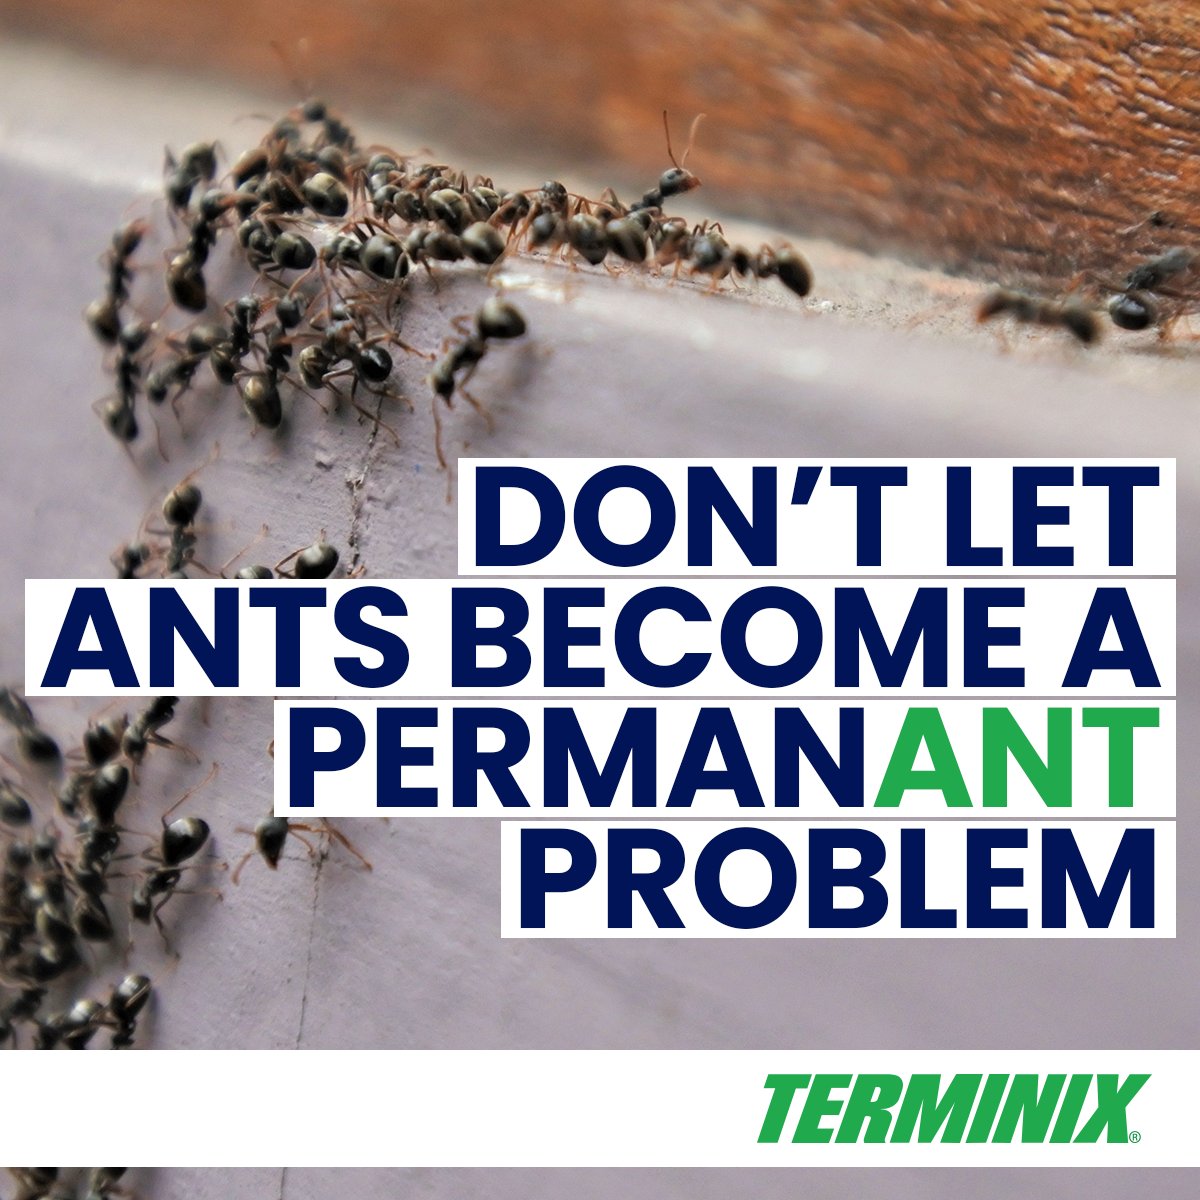 We know how tempting DIY is, especially when you see a trail of ants on your counter and have a party in 20 minutes and your mom is a real stickler about anything out of place - still, DIY doesn’t work for ant control, learn why. shorturl.at/zQR29